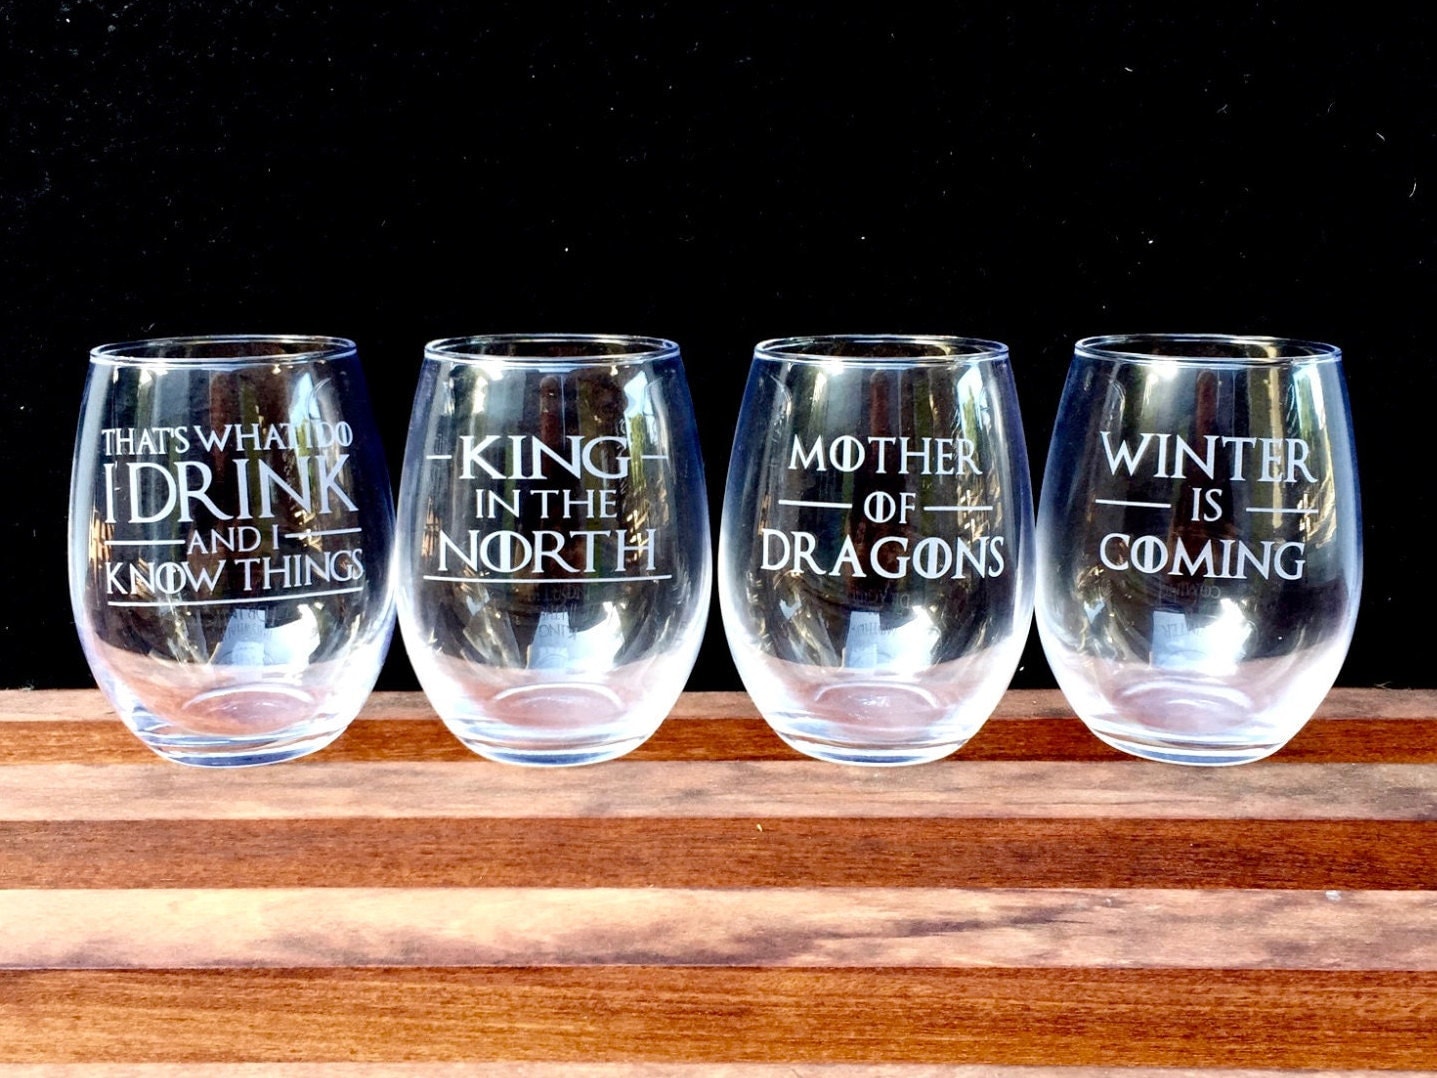 Game of Thrones Wine Glasses Etched Quotes - Set of 4 - I Drink and I Know things, King in the North, Winter is Coming, Mother of Dragons